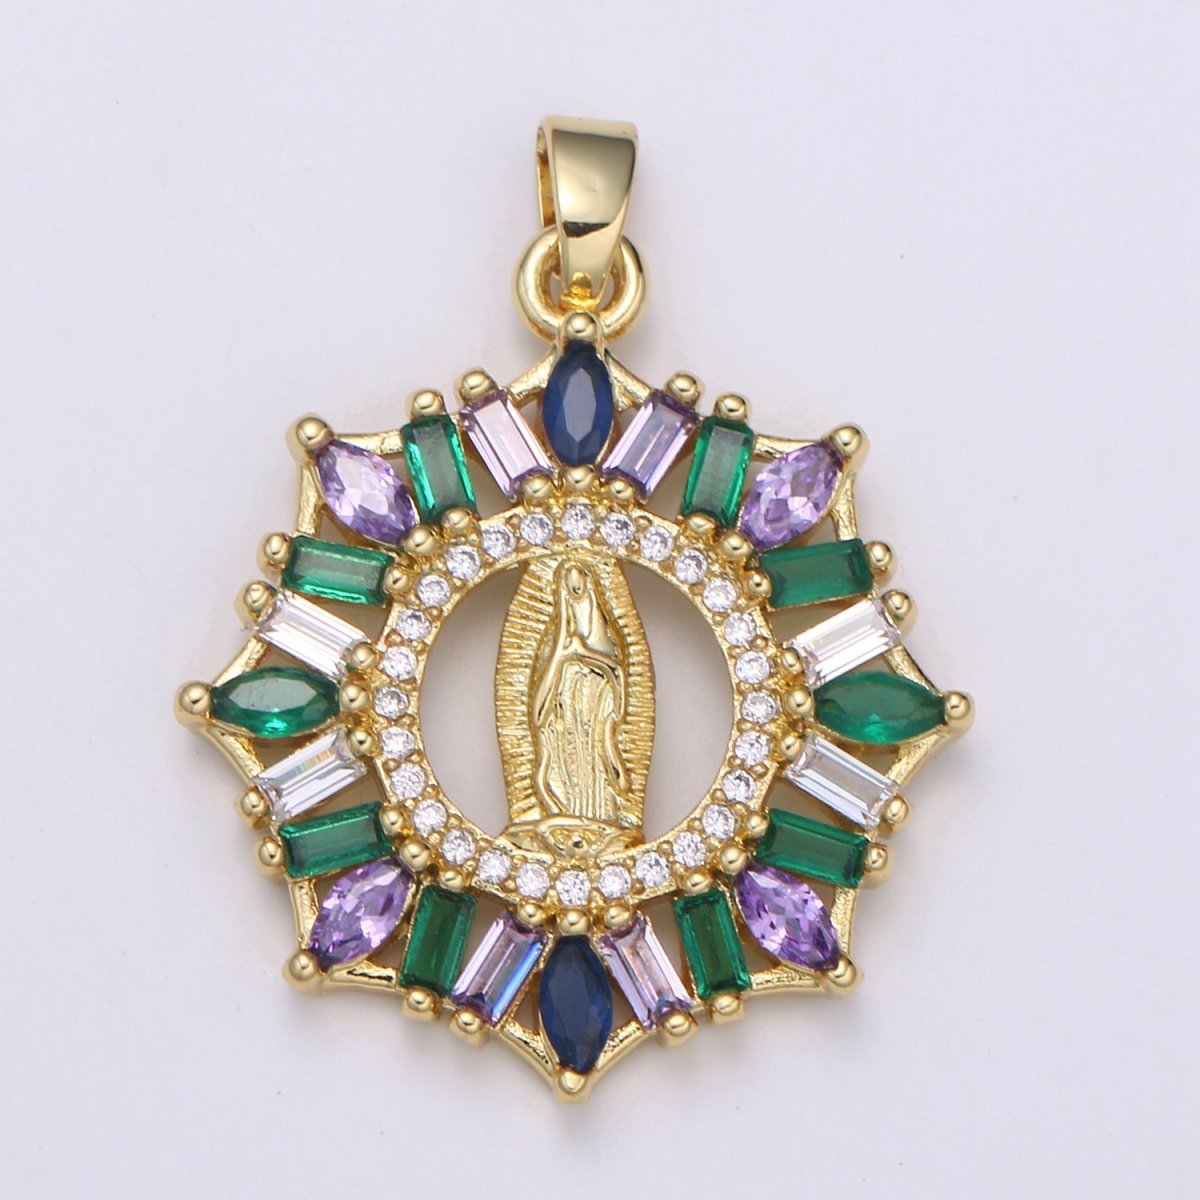 24K Gold Filled Virgin Mother Mary Pendant Micro Pave Baguette Lady of Guadalupe Medallion Necklace Charm for Religious Jewelry J-262 - DLUXCA